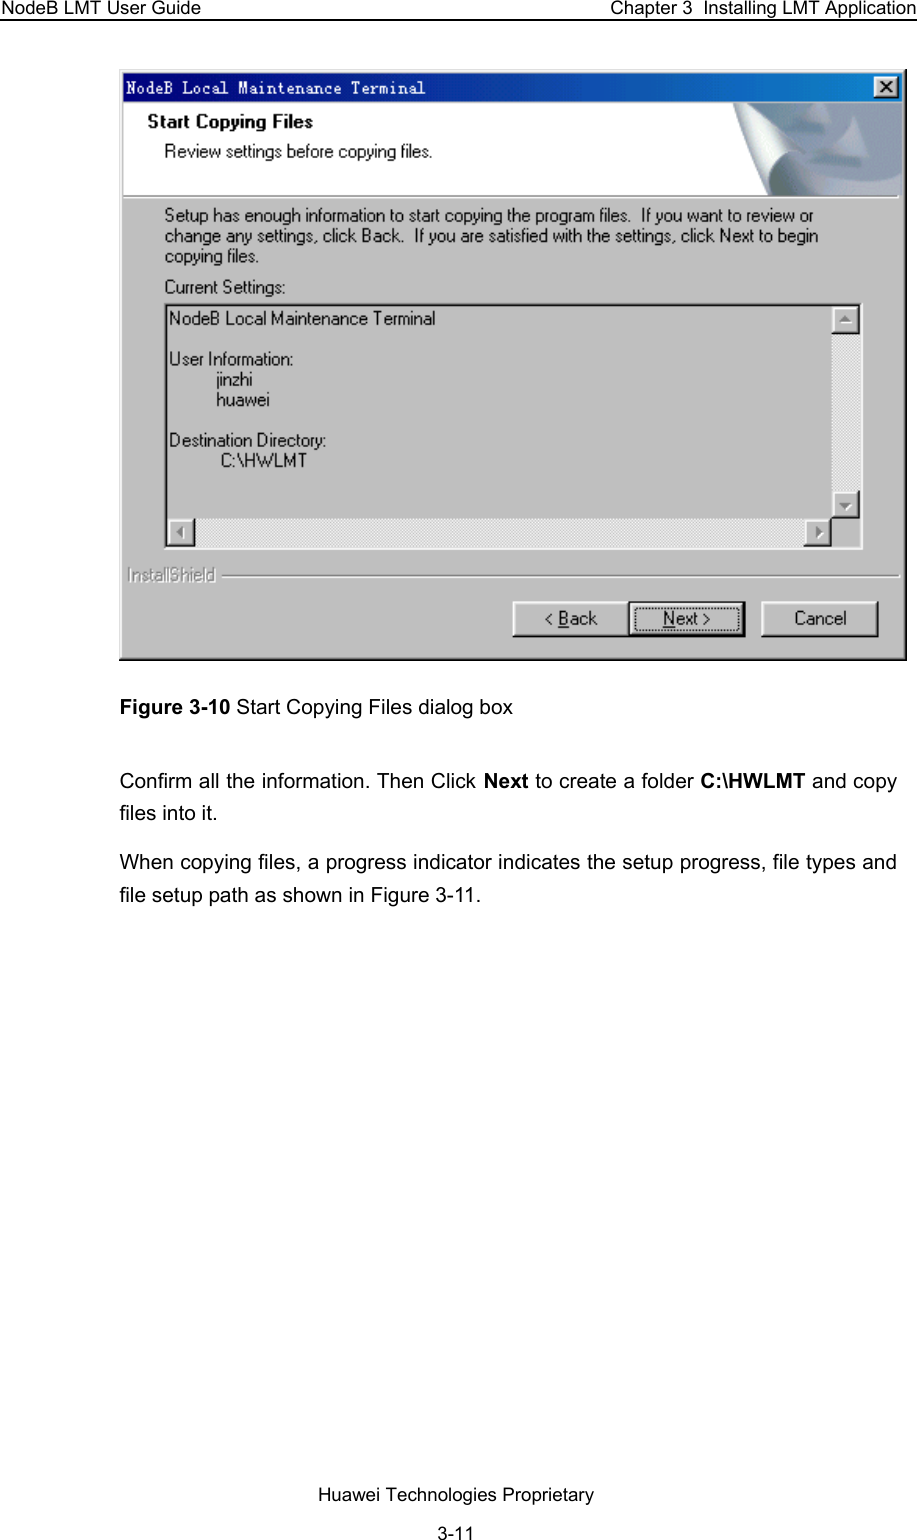 NodeB LMT User Guide  Chapter 3  Installing LMT Application  Figure 3-10 Start Copying Files dialog box  Confirm all the information. Then Click Next to create a folder C:\HWLMT and copy files into it.  When copying files, a progress indicator indicates the setup progress, file types and file setup path as shown in Figure 3-11. Huawei Technologies Proprietary 3-11 